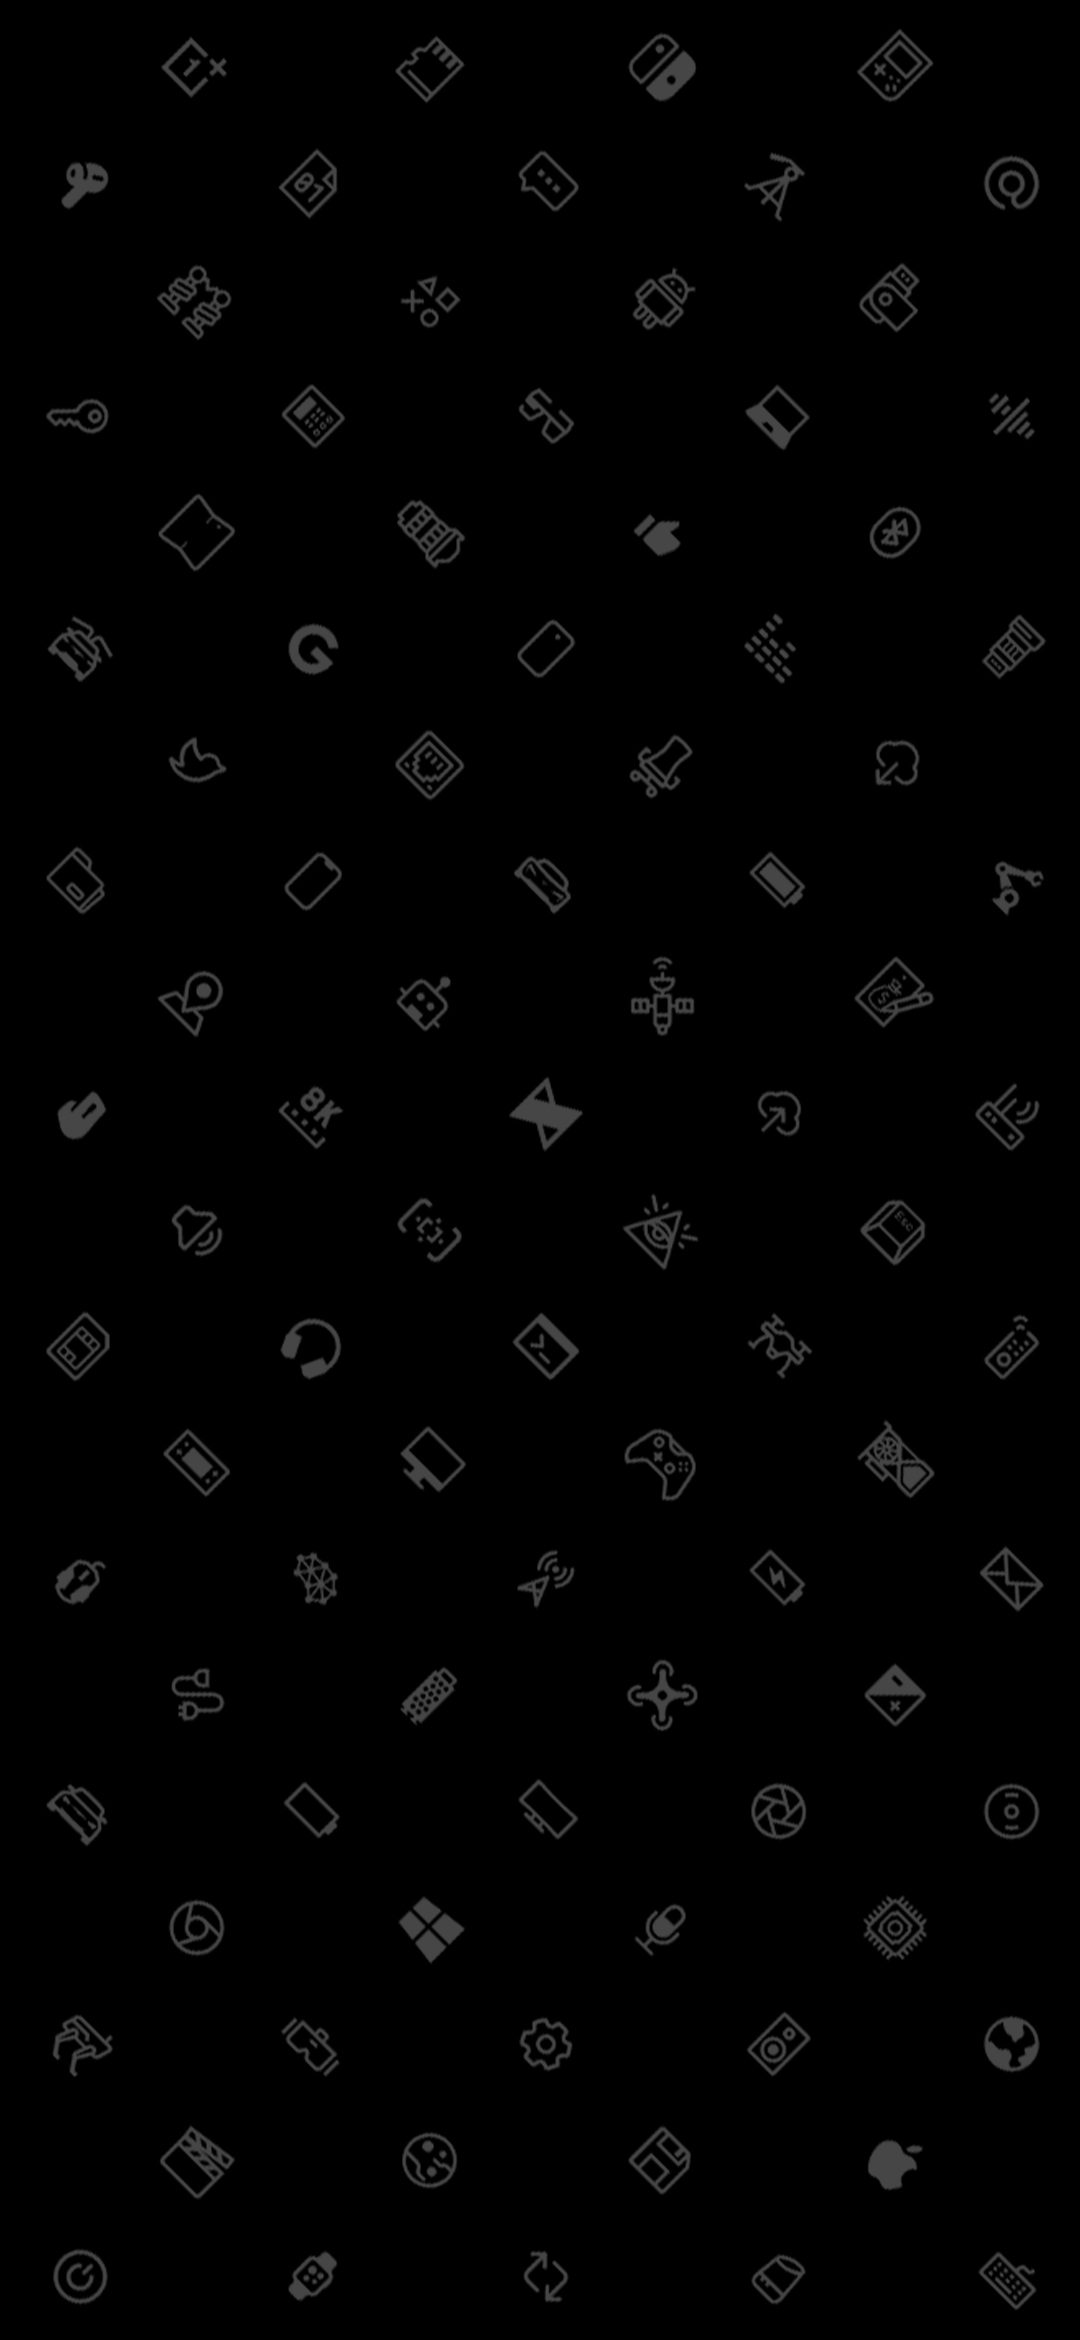 I found 2 hot wallpapers in some code of the dBrand site while bored  This is the first one I love them  rdbrand